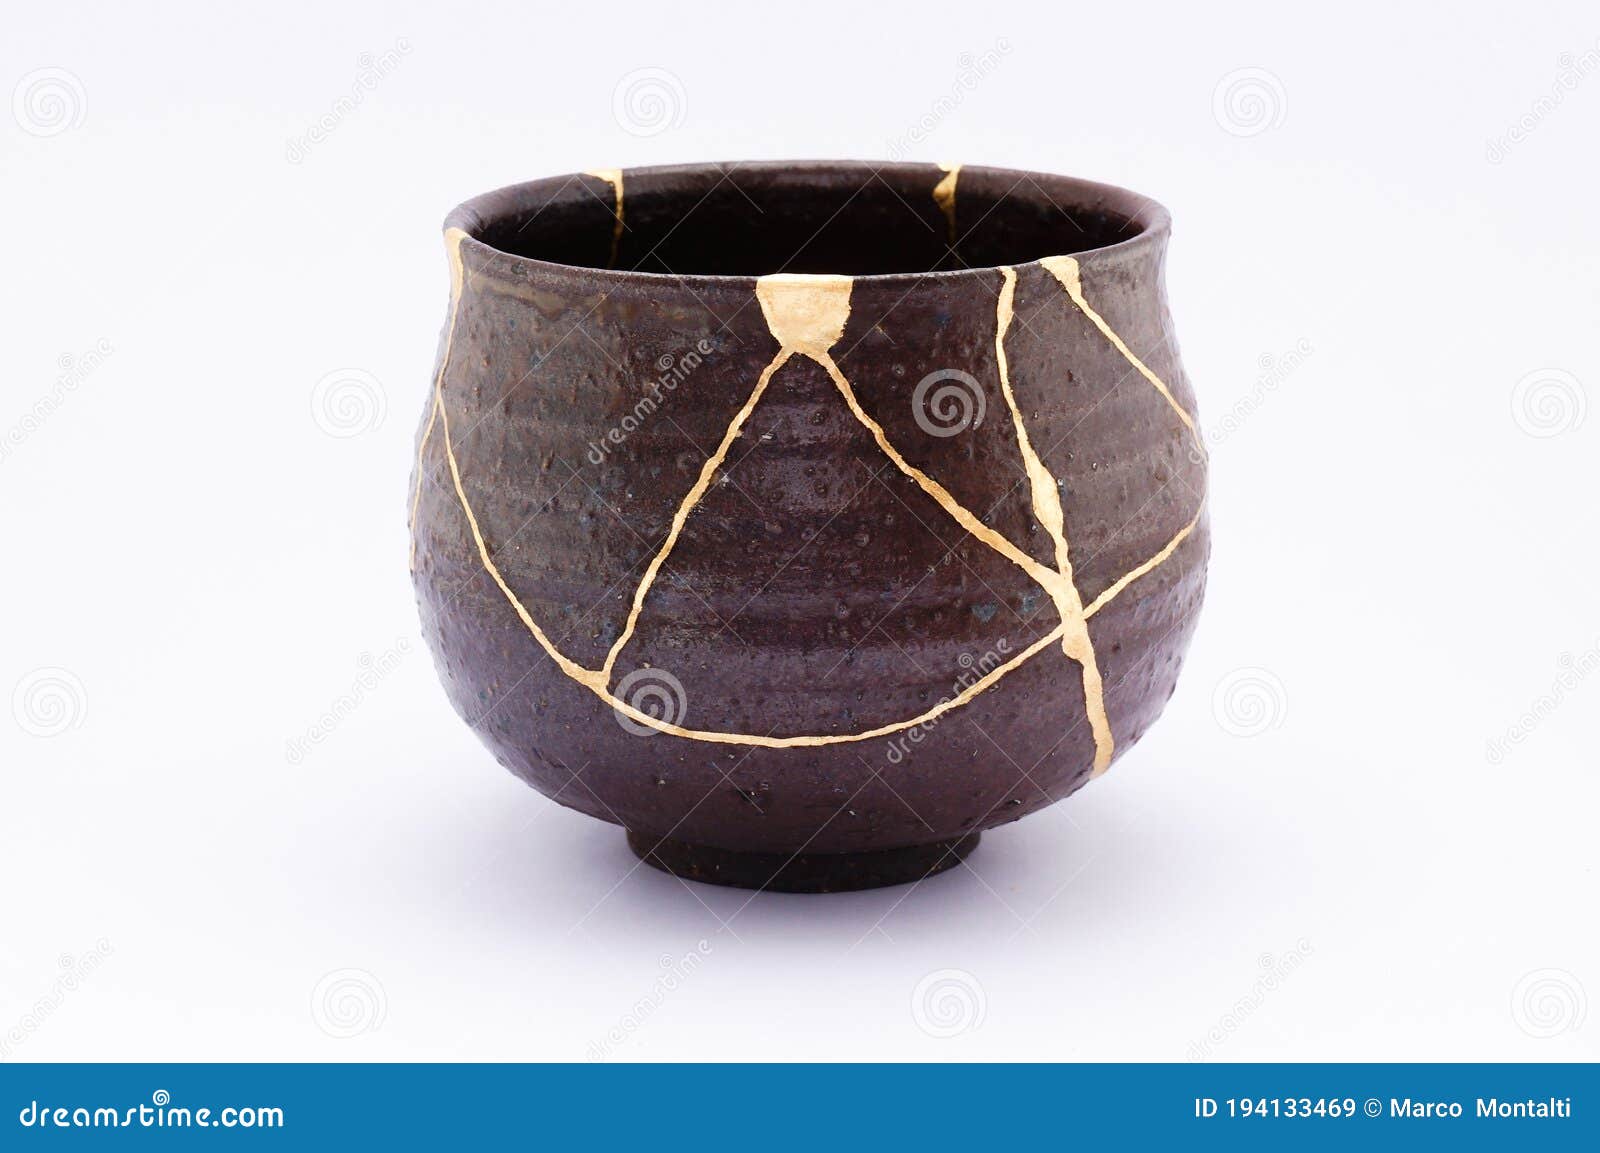 kintsugi antique japanese chawan restored with gold.